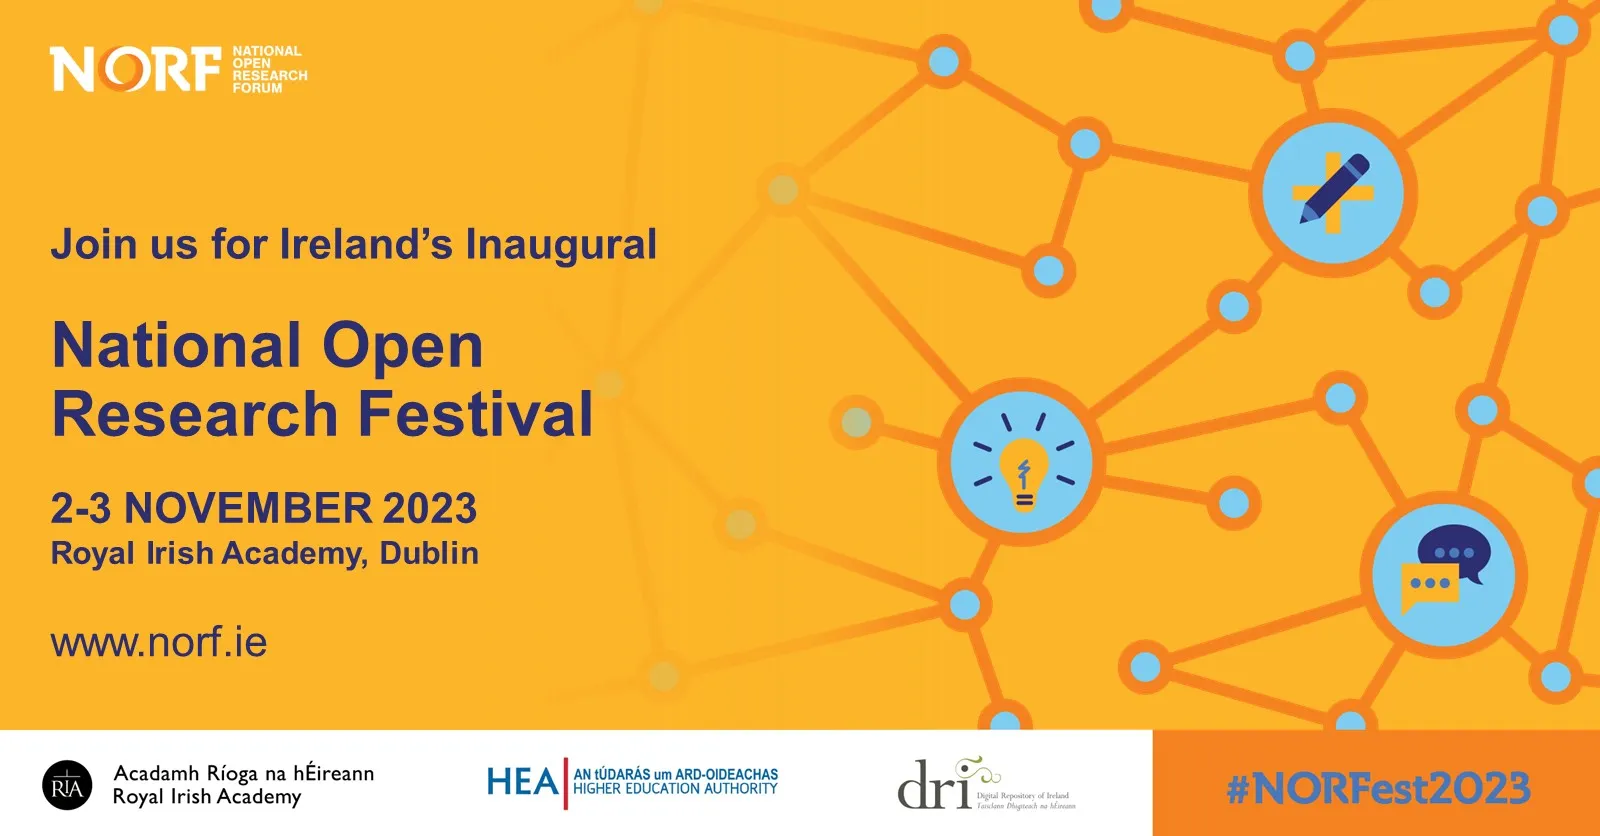 Graphic advertising NORFest2023 with text on an orange background reading 'Join us for Ireland's inaugural National Open Research Festival, 2-3 November 2023, Royal Irish Academy, Dublin'.